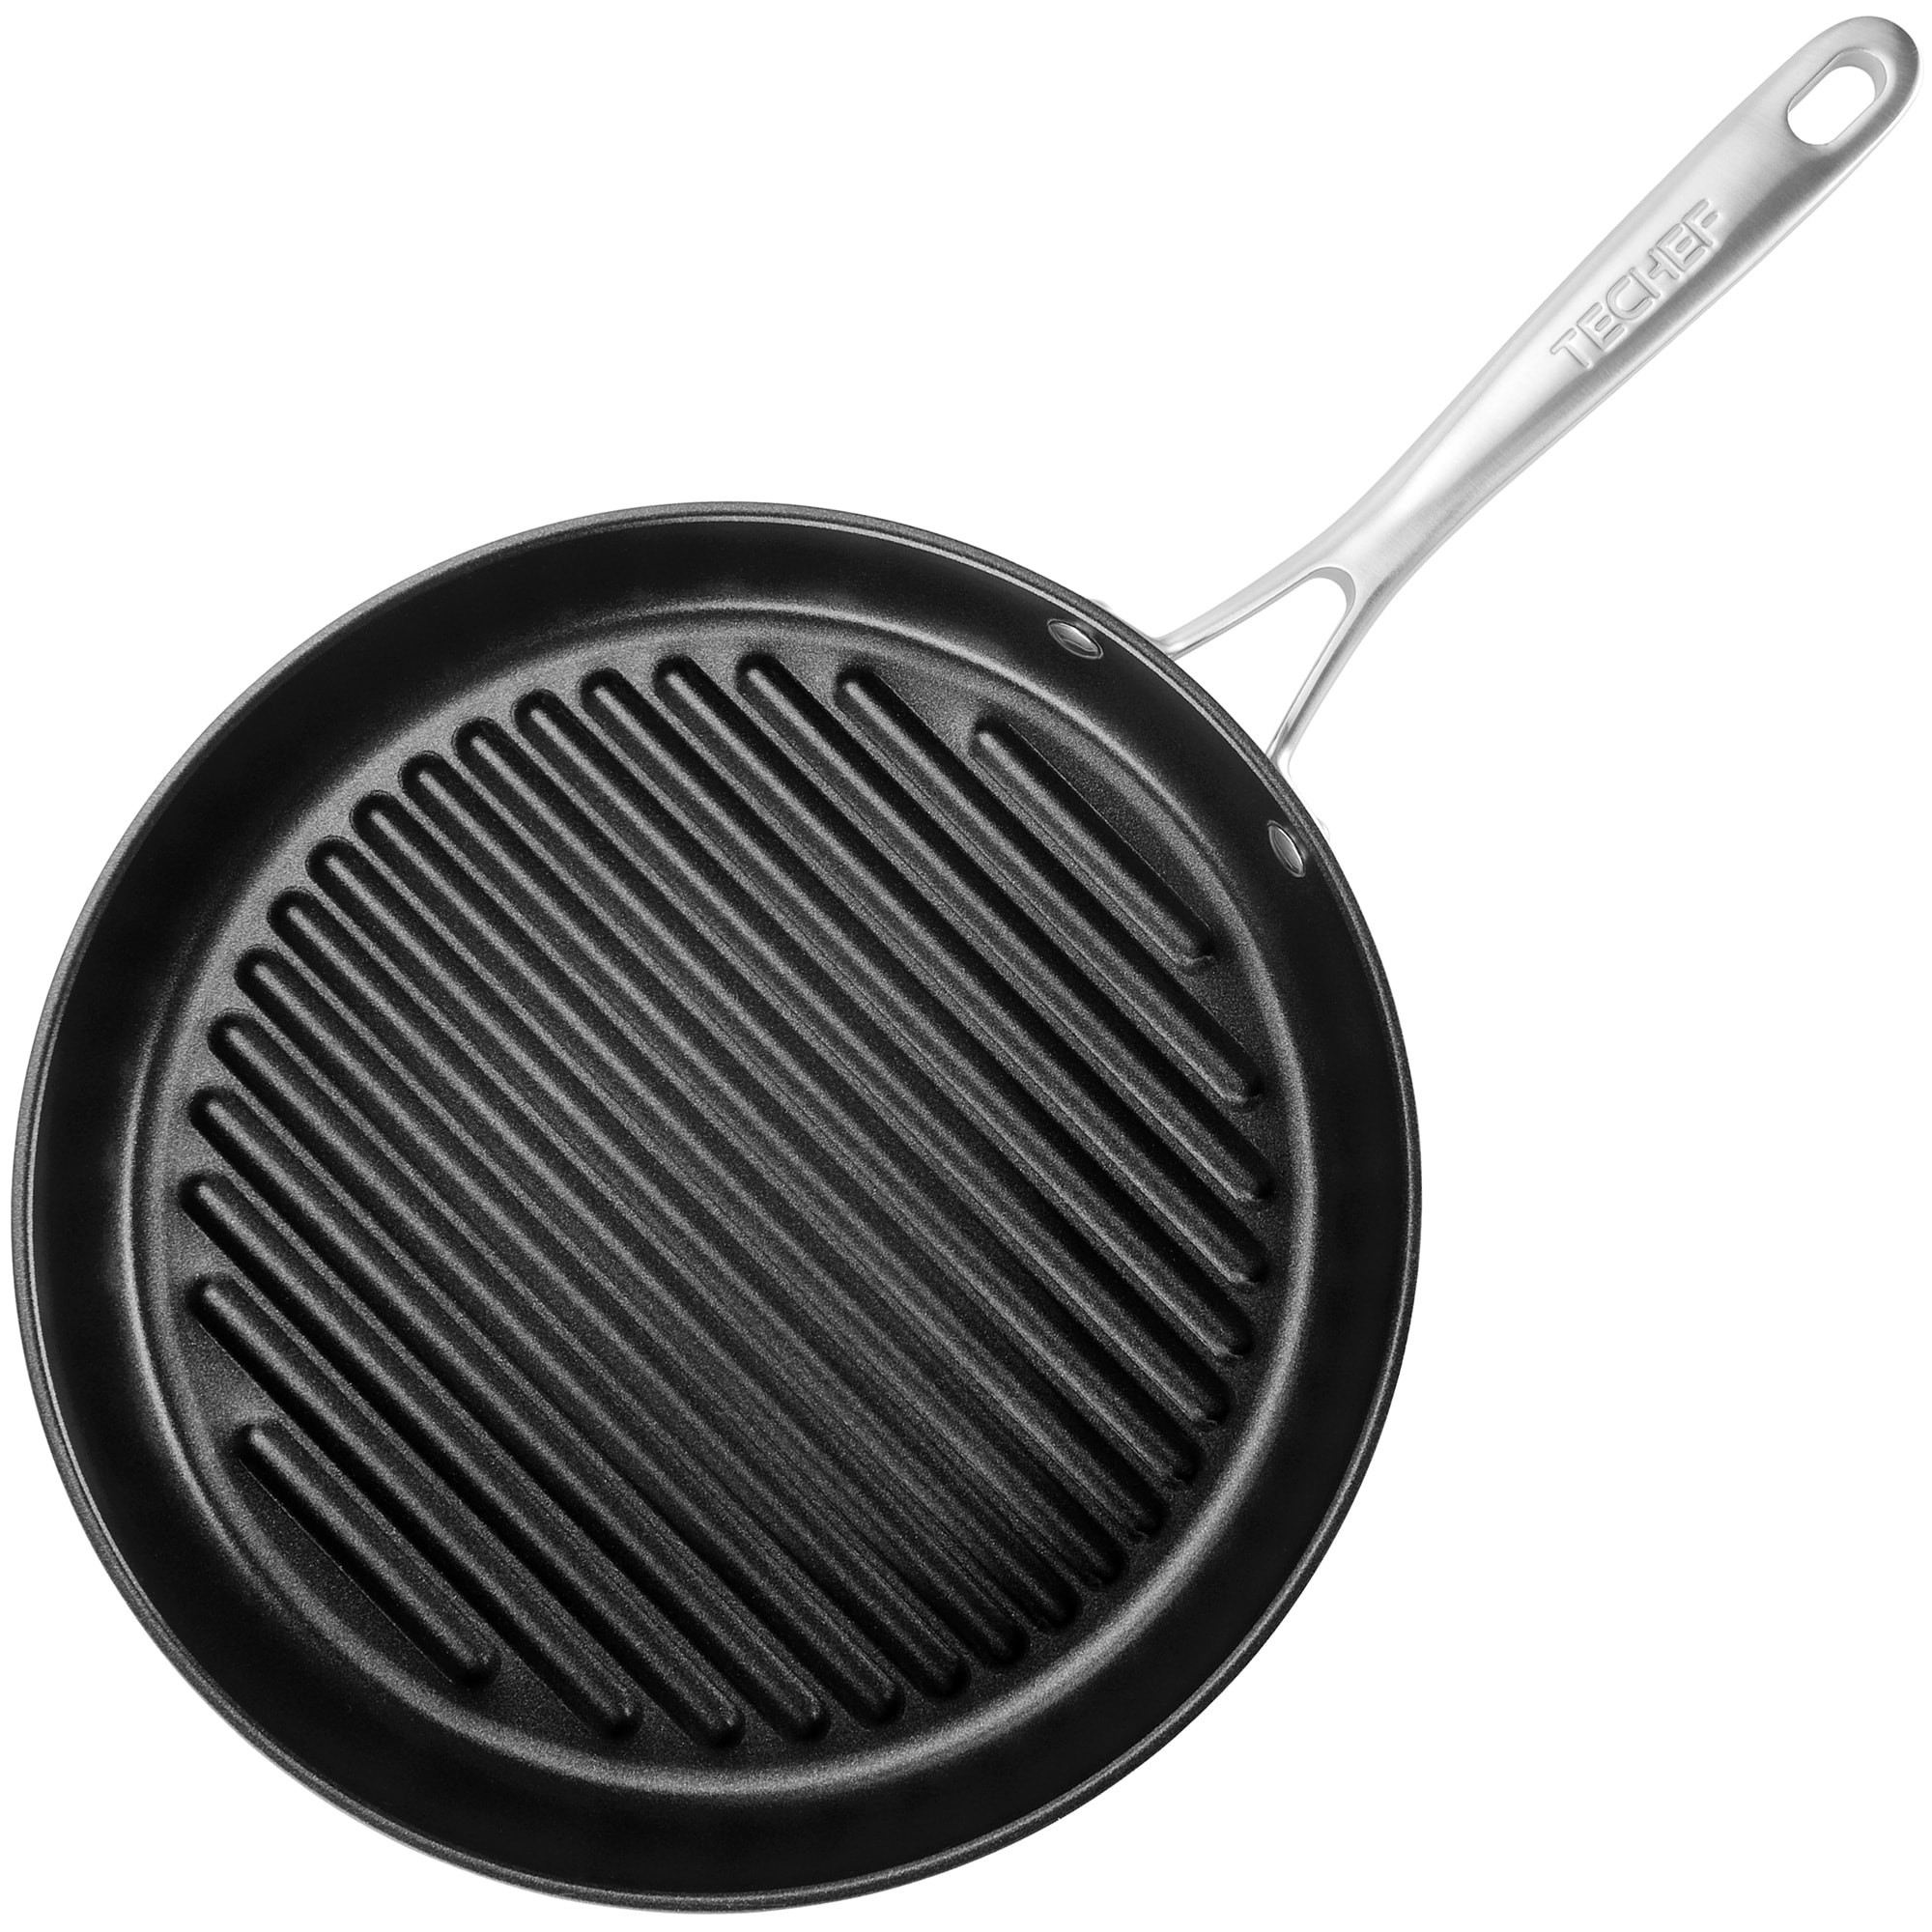 TECHEF - Onyx Collection 8-Inch Nonstick Frying Pan Skillet, PFOA-Free,  Dishwasher Oven Safe, Stainless Steel Handle, Induction-Ready, Made in  Korea